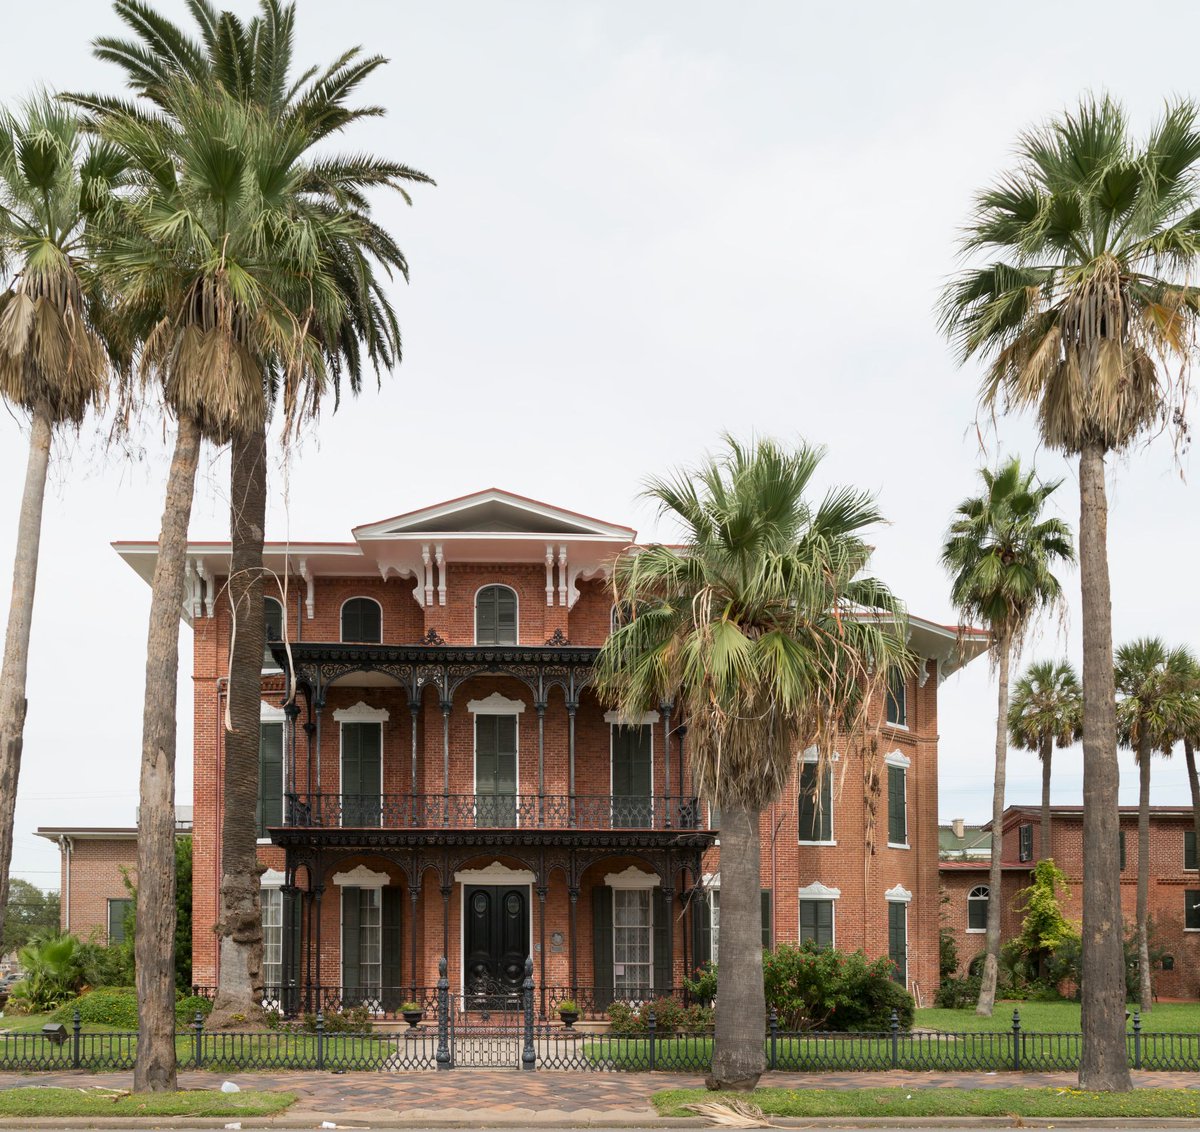 Ashton Villa, Galveston, Texas' first brick home, was built by enslaved Black people, including a man named Alek, a brick mason. In 1865, it was from the villa's balcony that a Union general announced that all enslaved people were free. #Juneteenth.